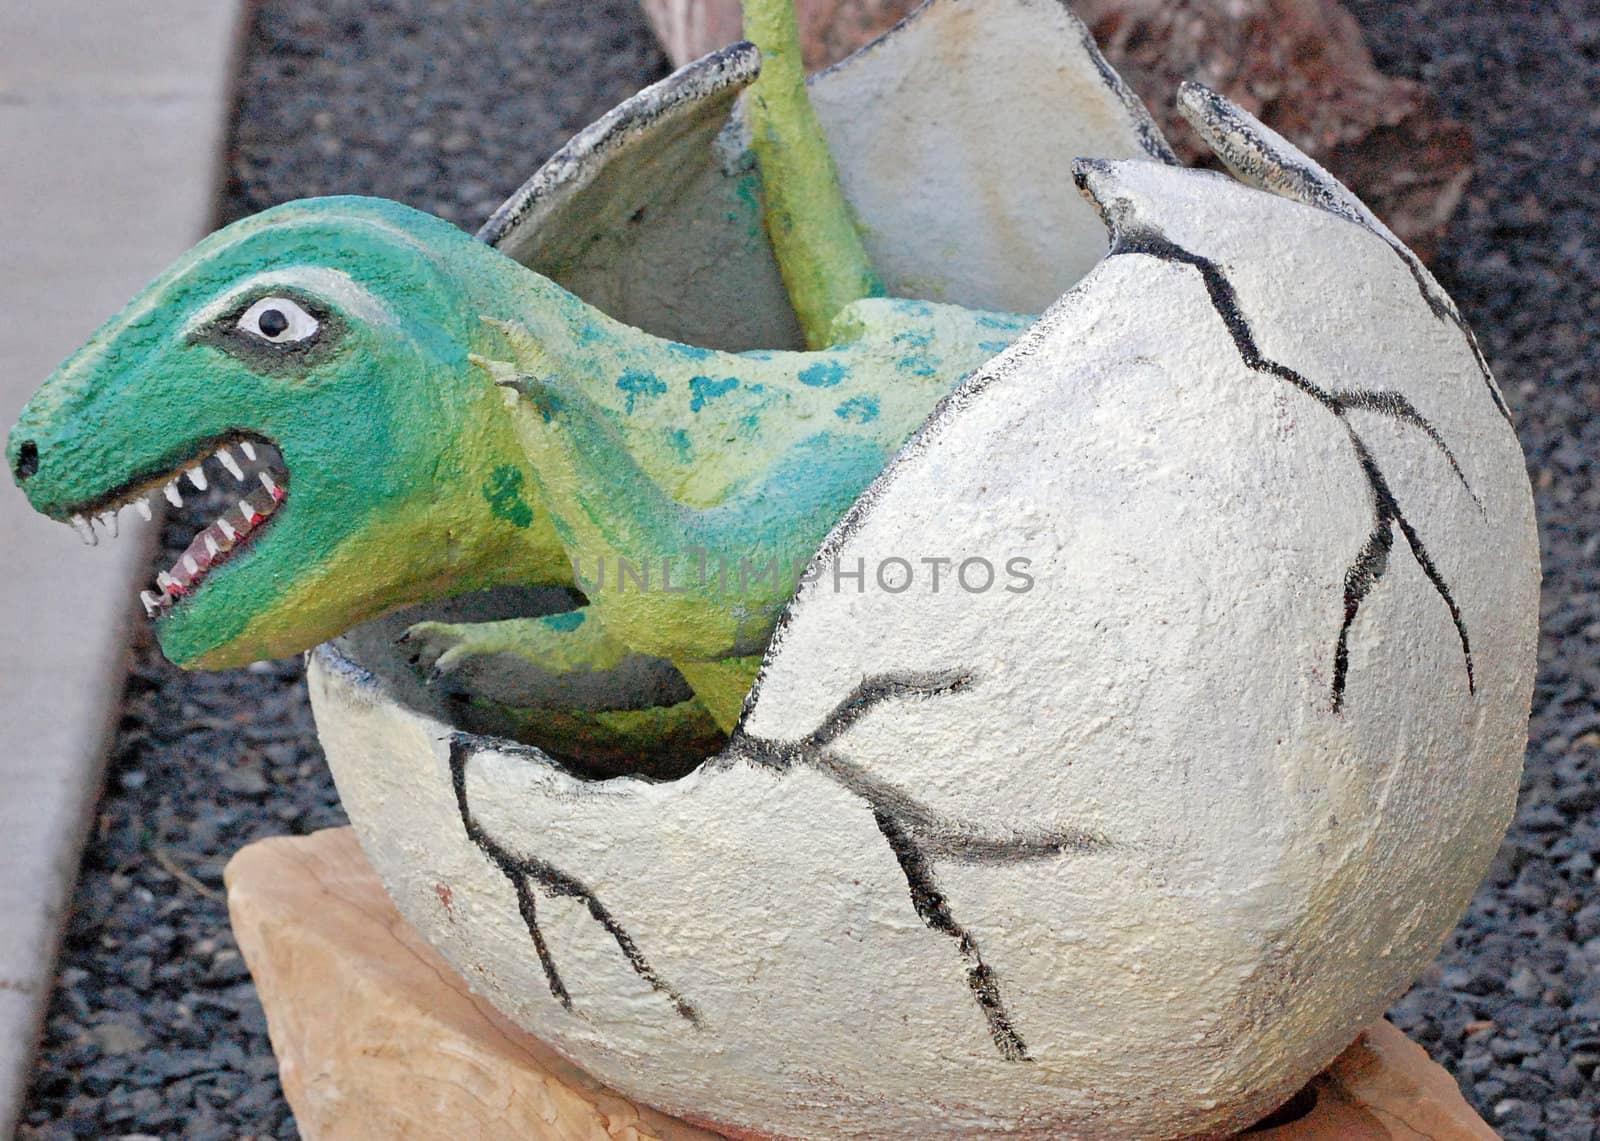 Dinosaur hatching out of egg